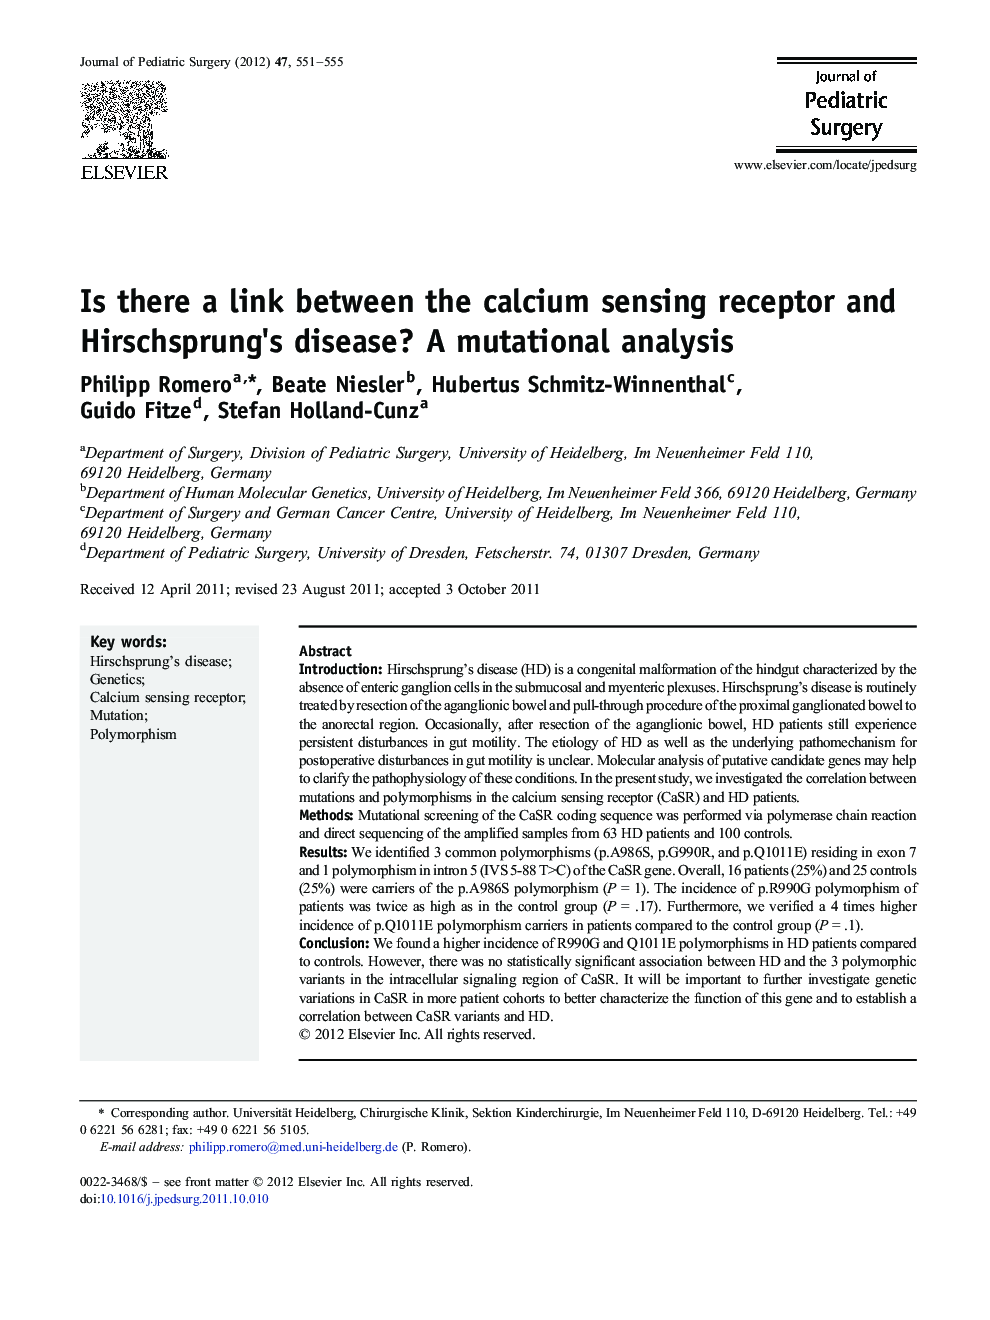 Is there a link between the calcium sensing receptor and Hirschsprung's disease? A mutational analysis